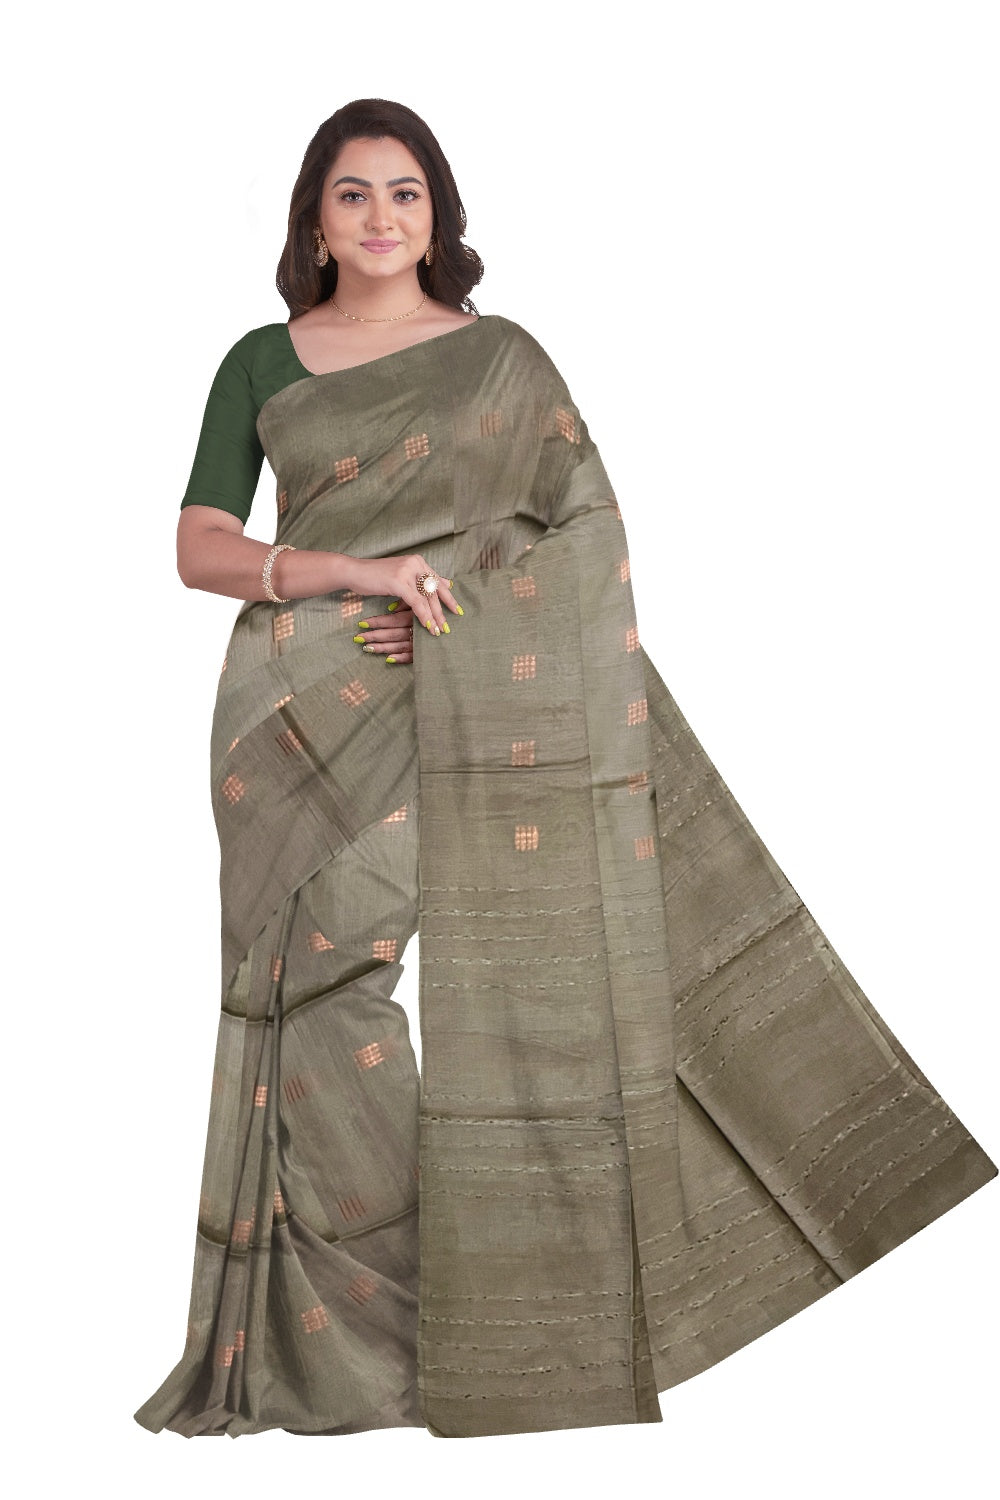 Southloom Cotton Brown Saree with Copper Butta Works on Body